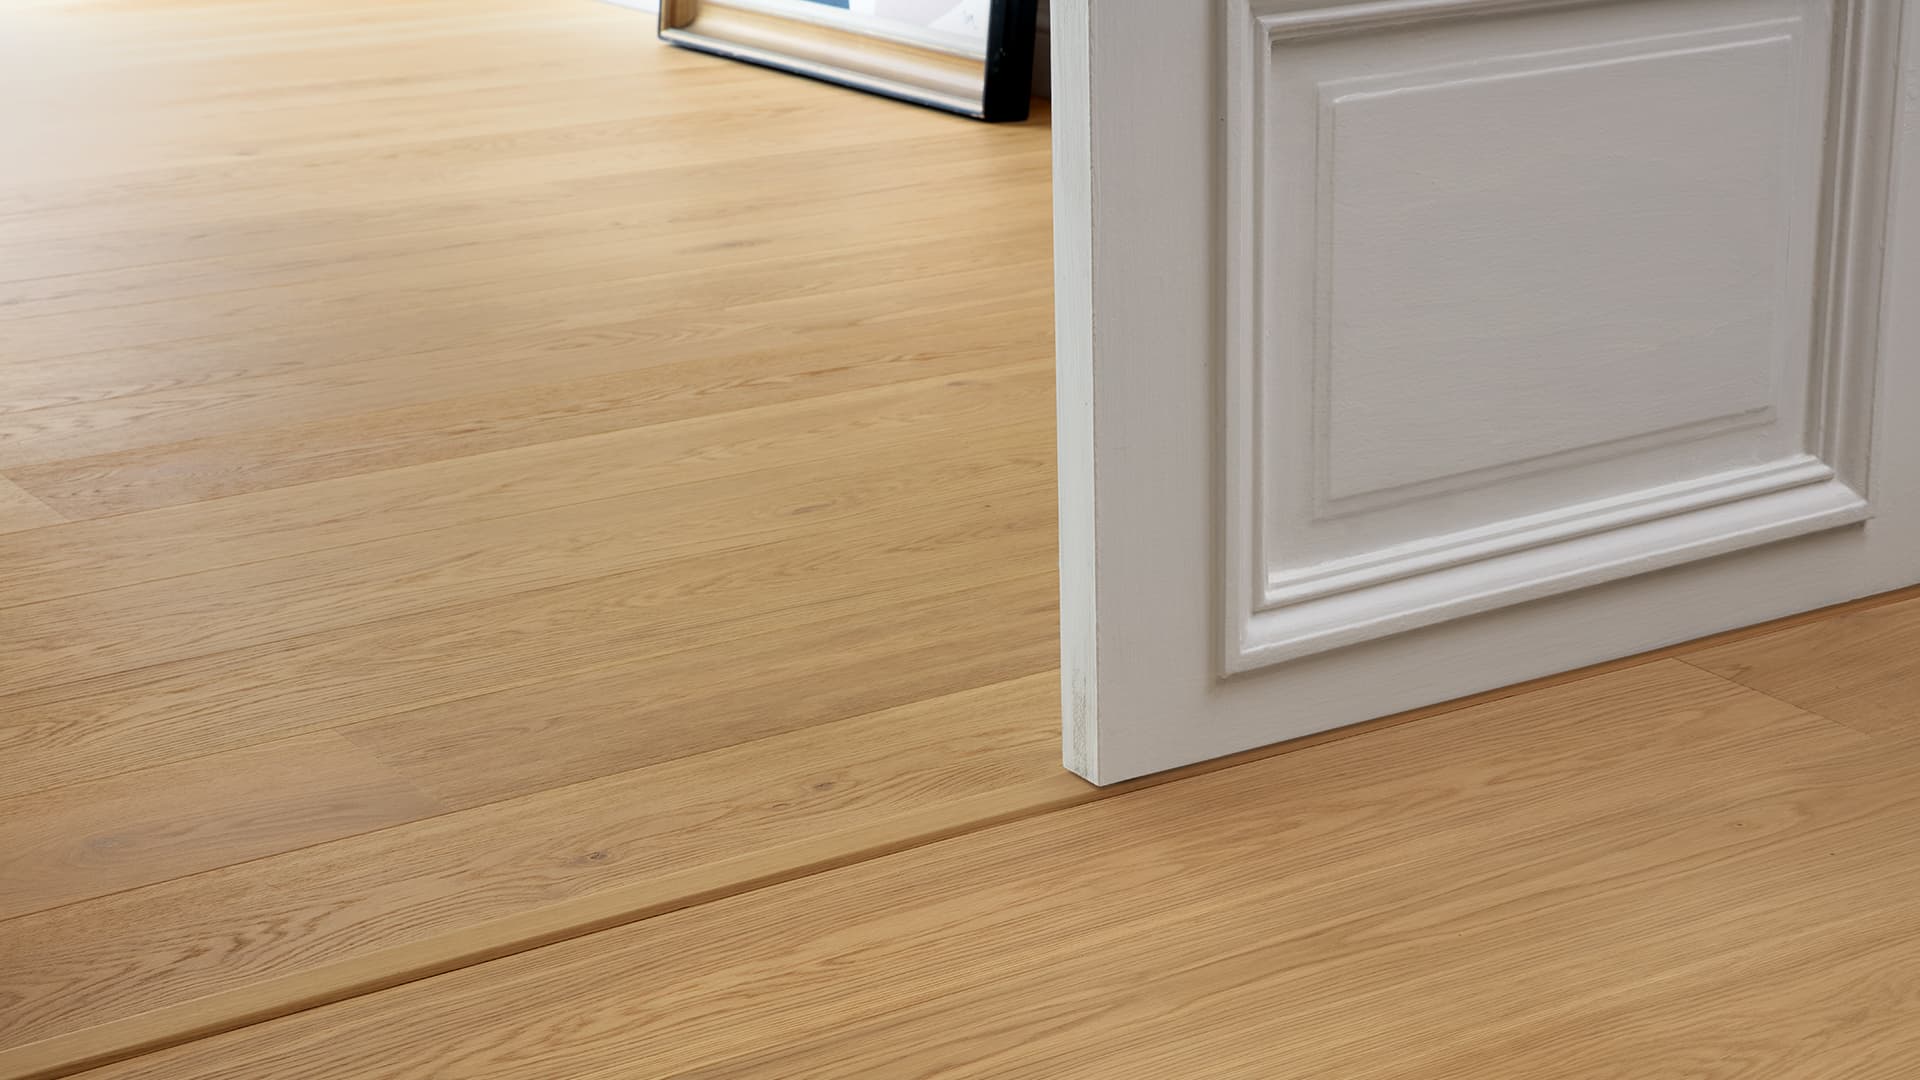 Quick-step profiles for wood